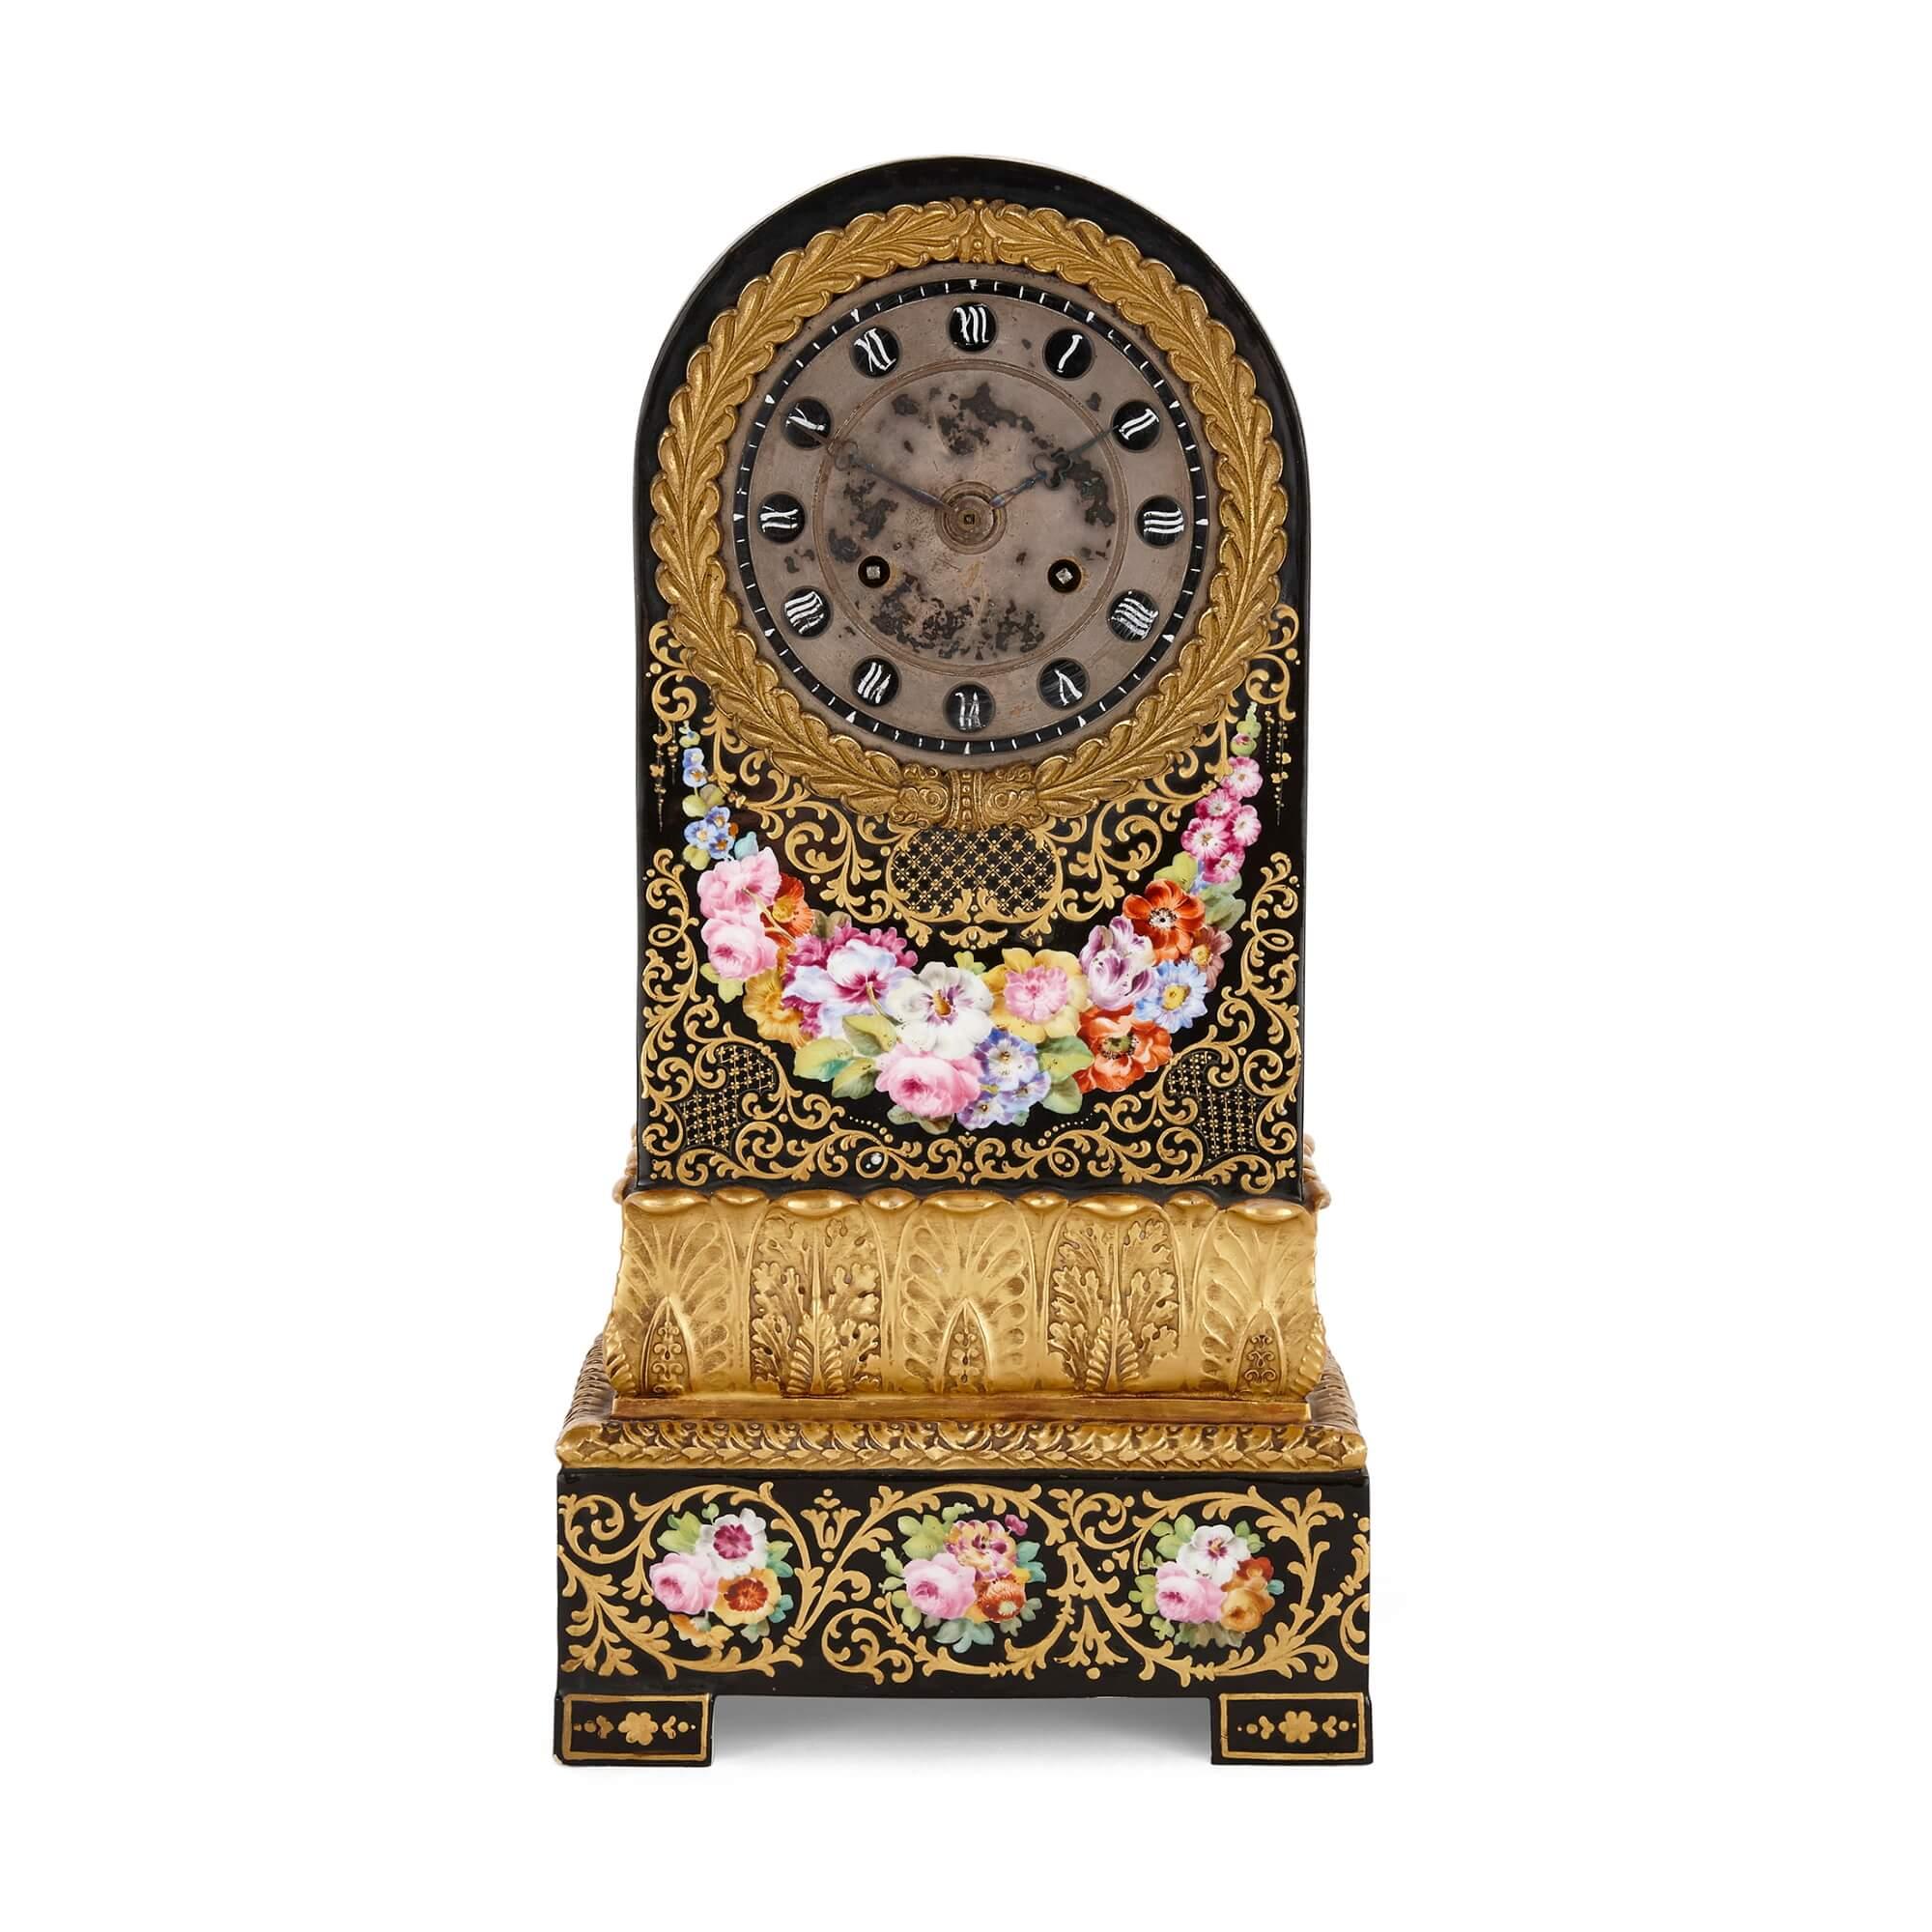 Charles X Period Ormolu Mounted Jacob Petit Porcelain Mantel Clock
French, c.1825
Height 36cm, width 18.5m, depth 10.5cm

Set within a beautiful porcelain case, parcel gilt, and florally decorated against a black ground, this fine mantel clock, with